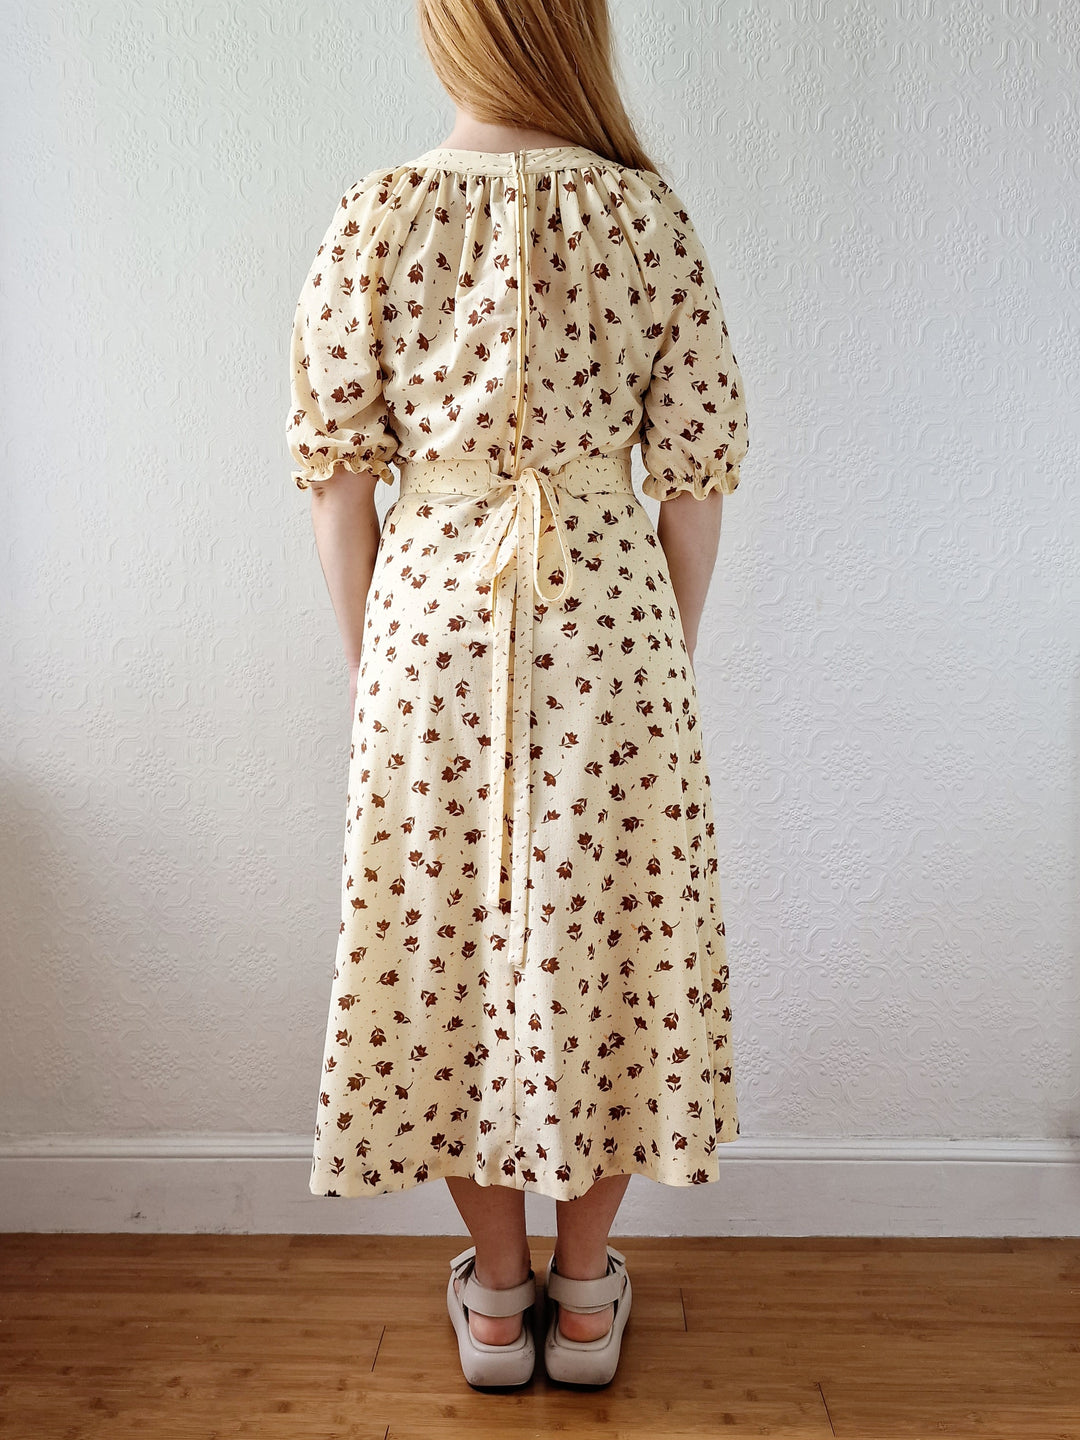 Vintage 70s Yellow Floral Midi Dress with Short Puff Sleeves - S/M